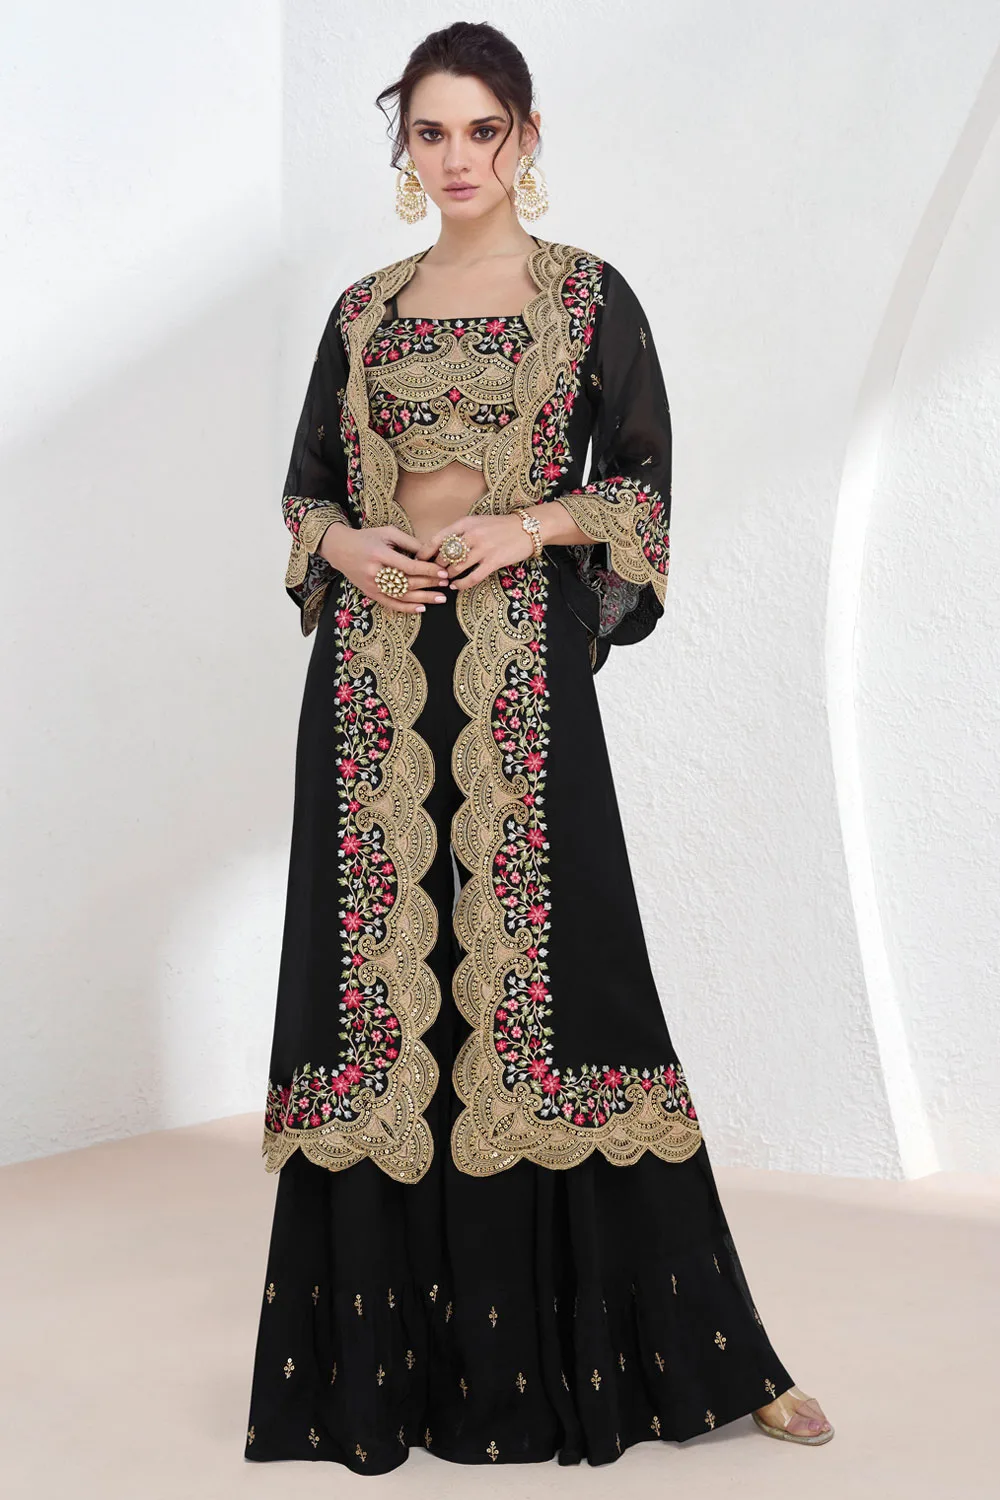 Black Georgette Indo-Western Dress with Pink Accents & Net Dupatta